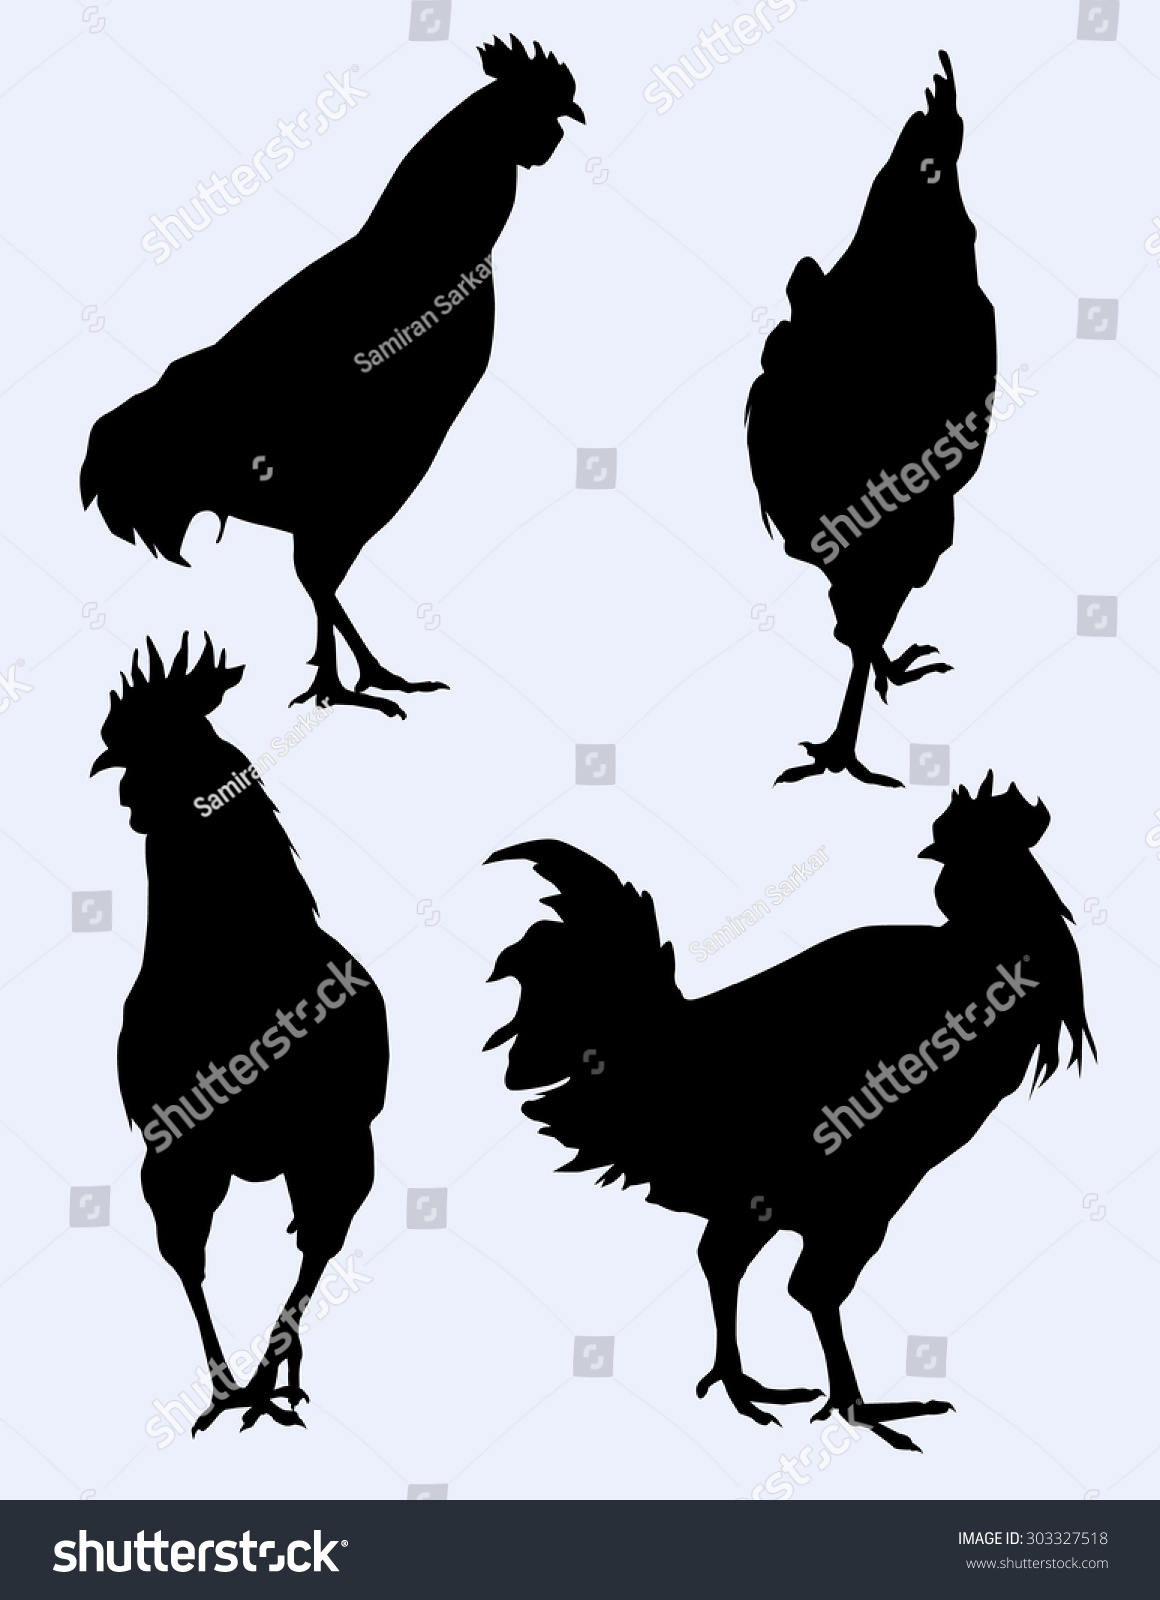 Hens Silhouette Vector Stock Vector Royalty Free 303327518 